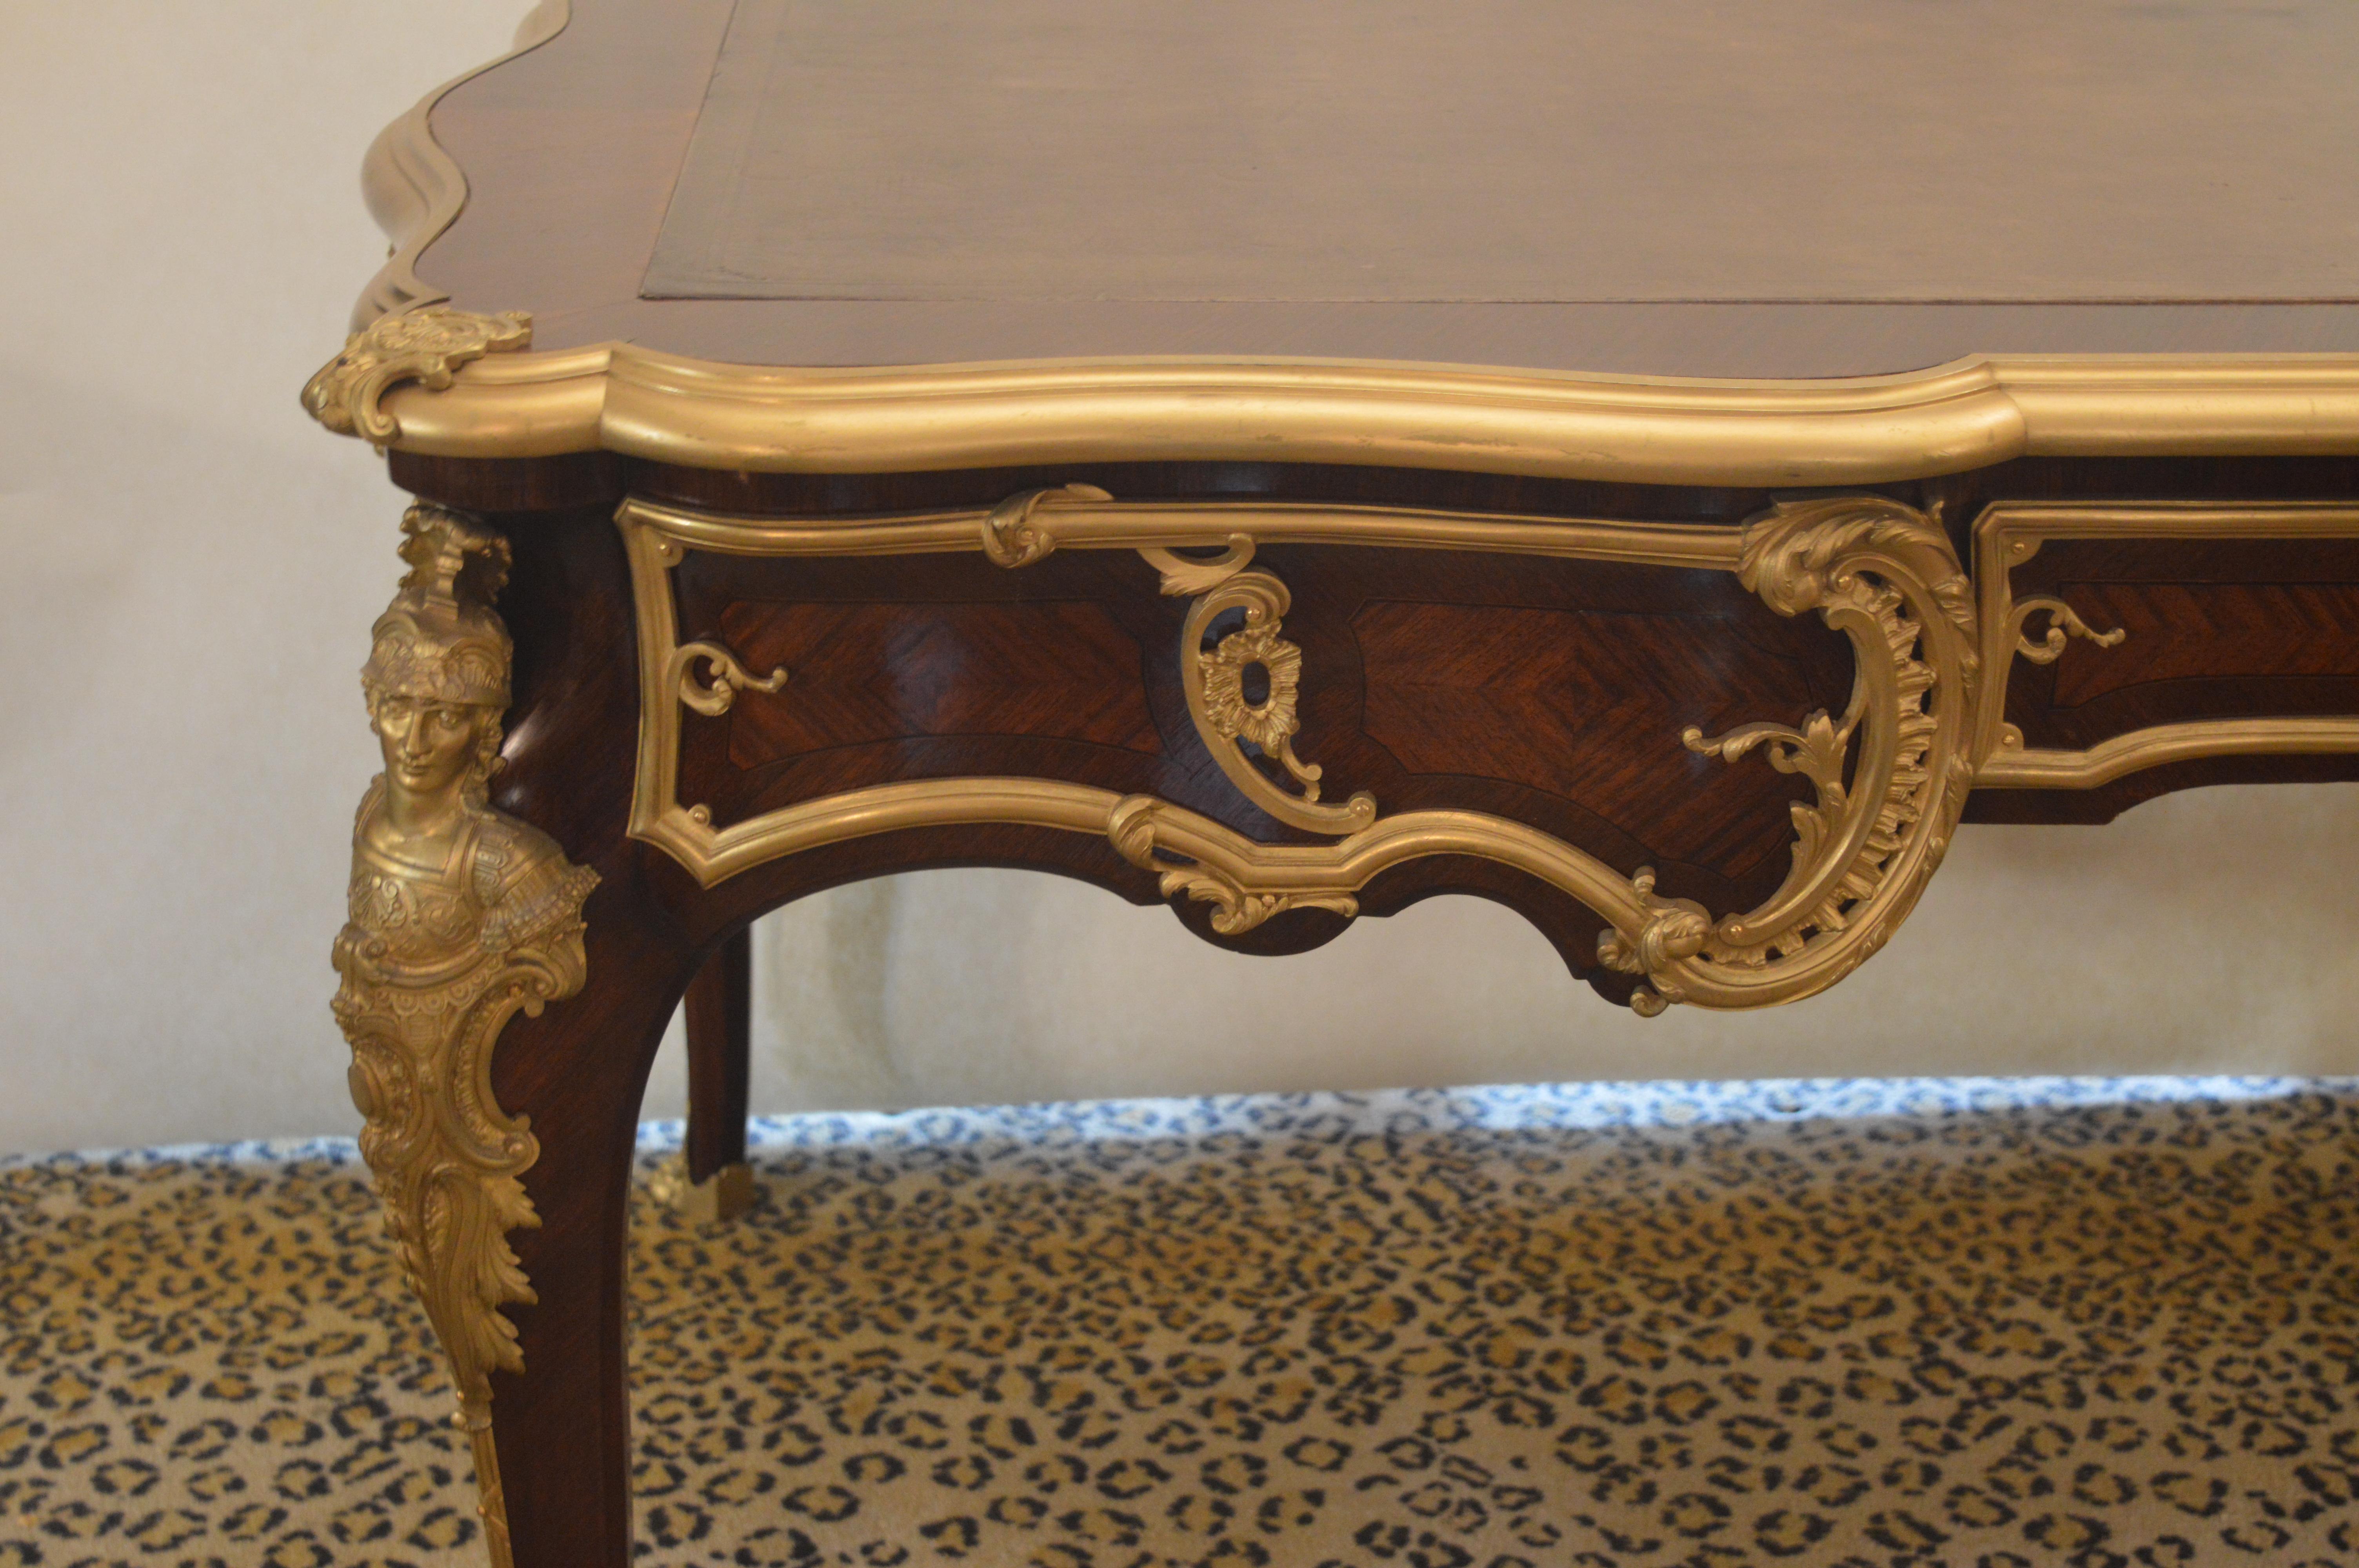 19th century desk signed P. Sormani. Parquetry with a dark brown leather top. Gilded bronze